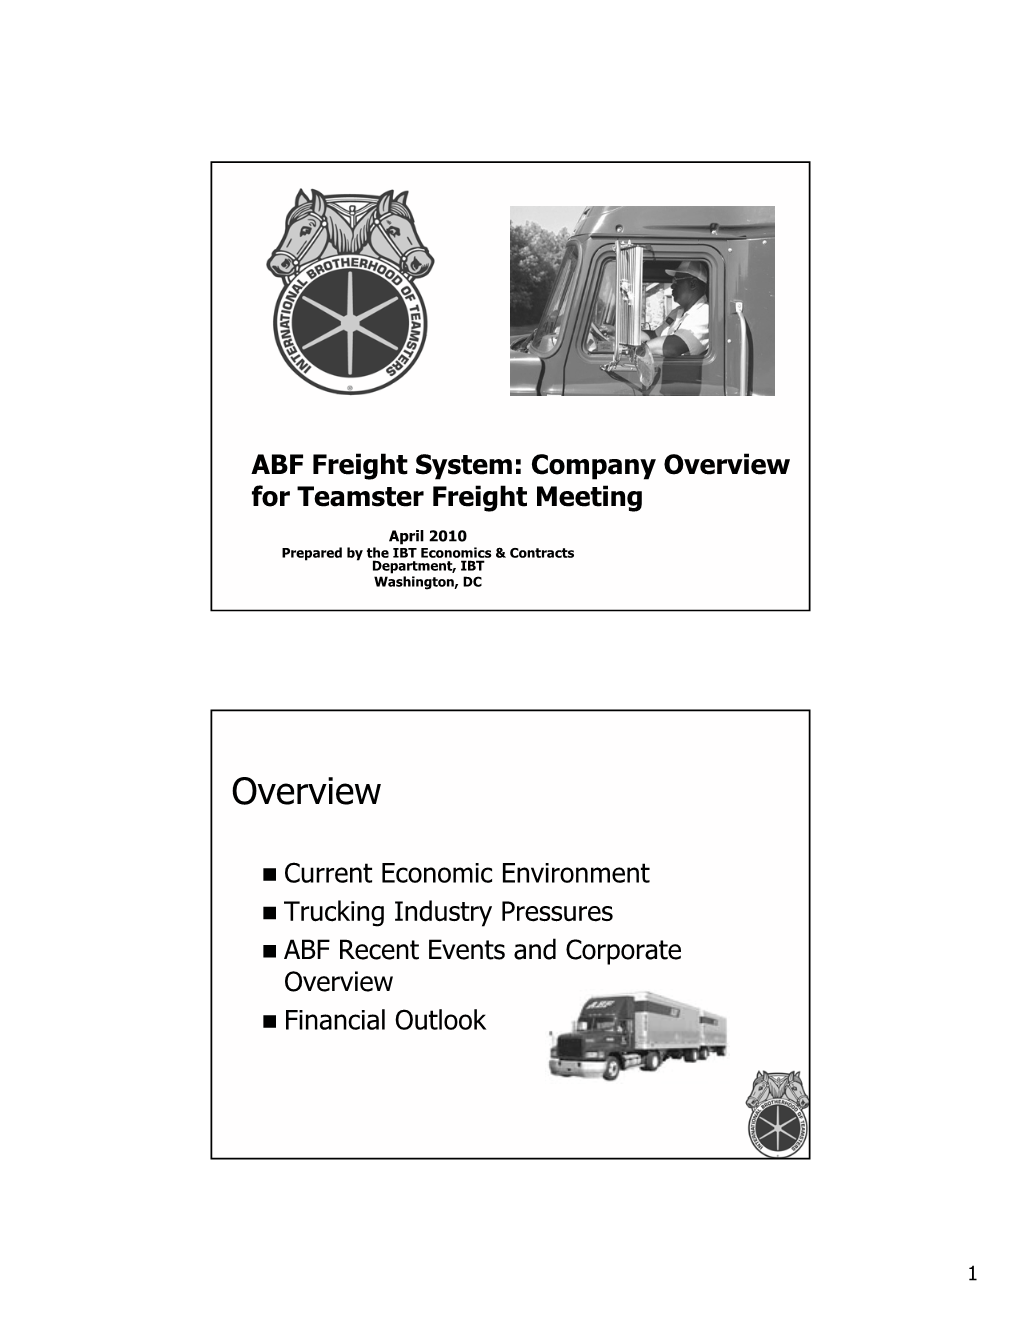 ABF Freight System: Company Overview for Teamster Freight Meeting